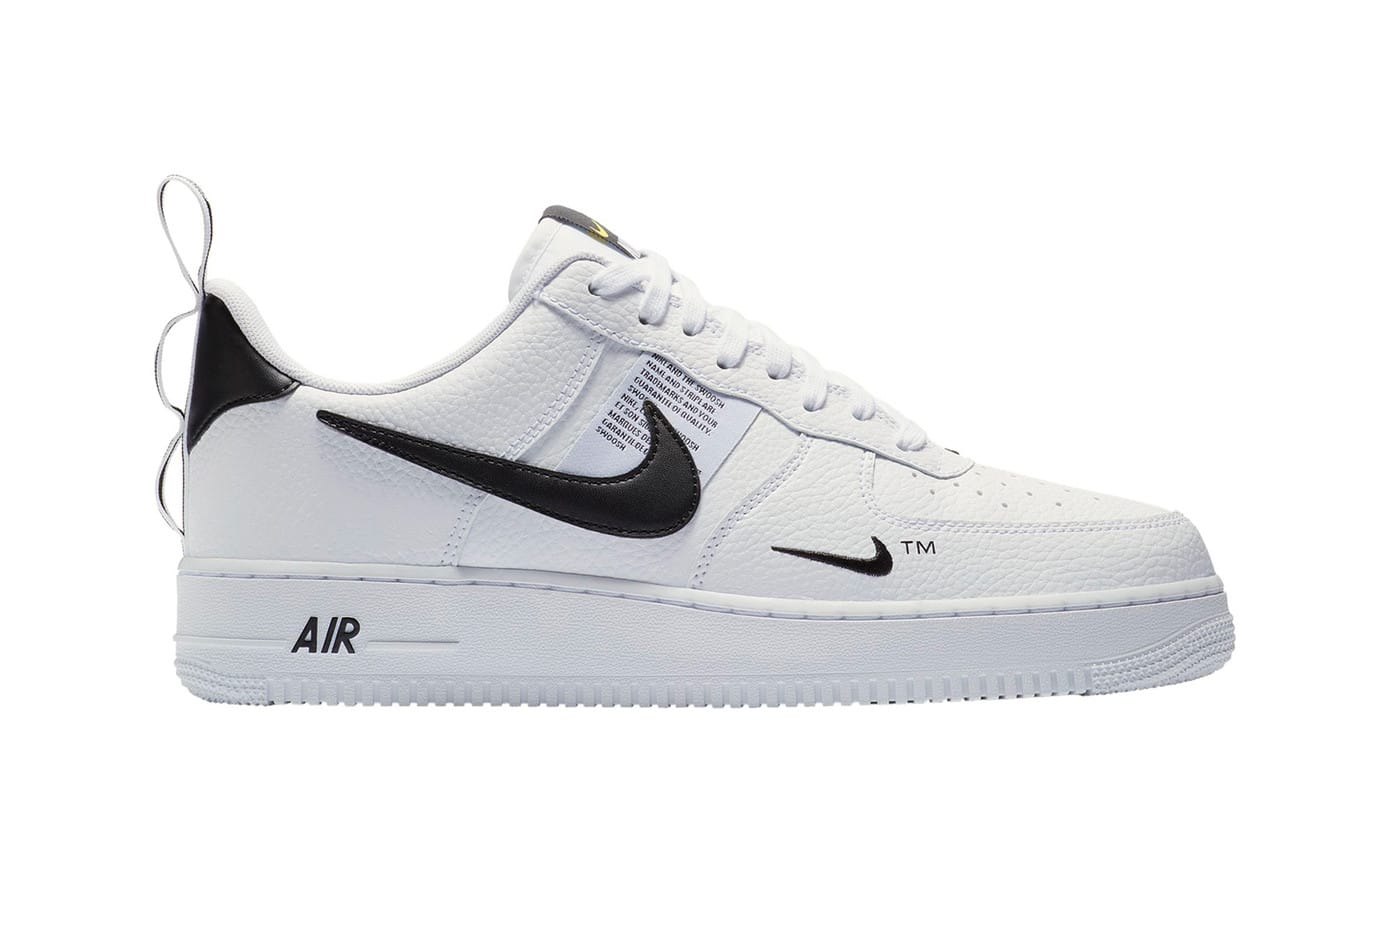 Nike Air Force 1 '07 LV8 から “Utility 